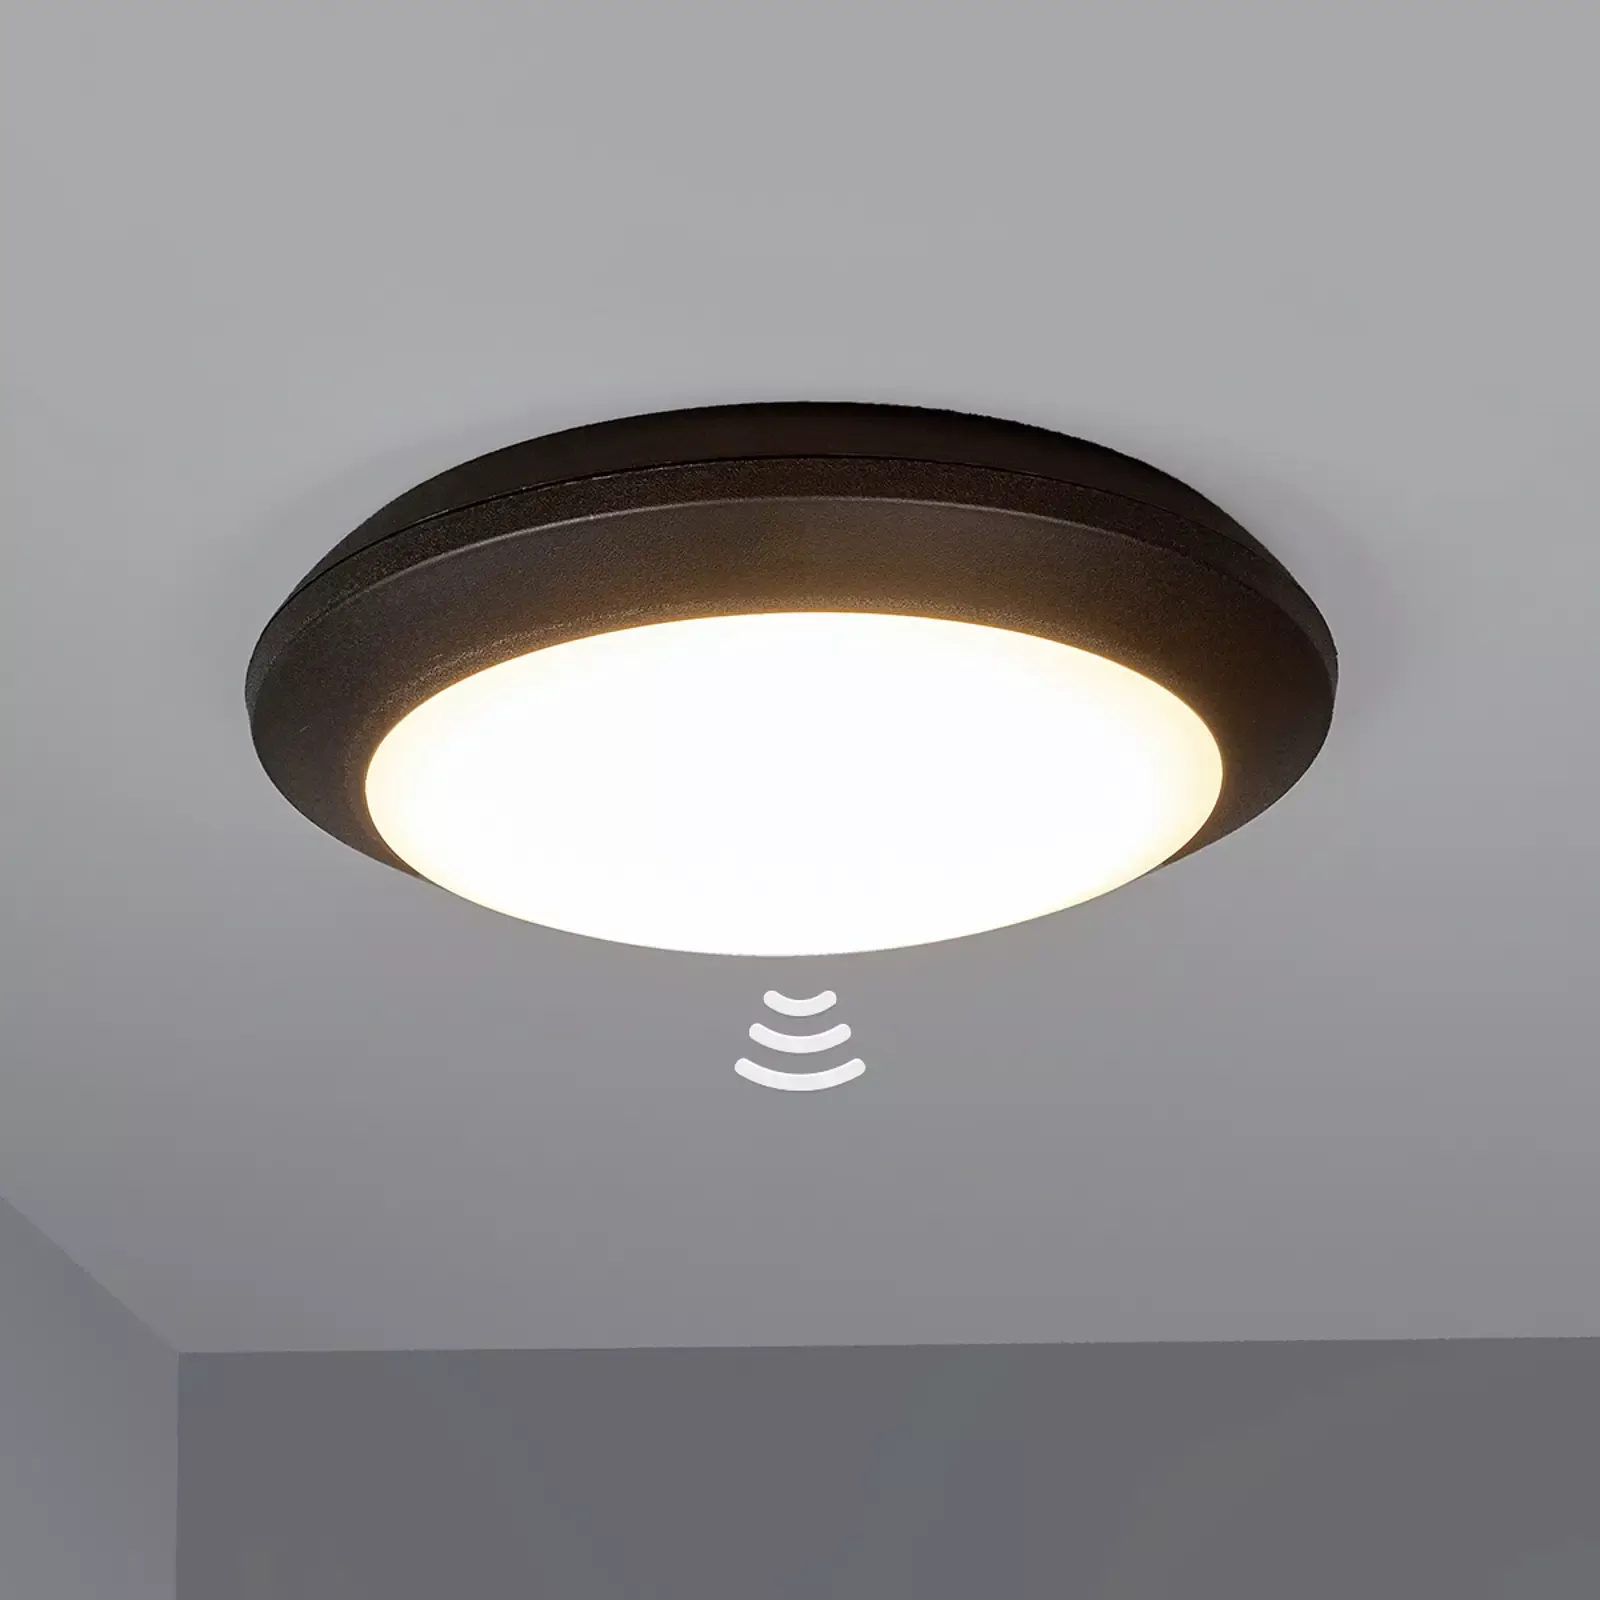 Wall lights with motion detector